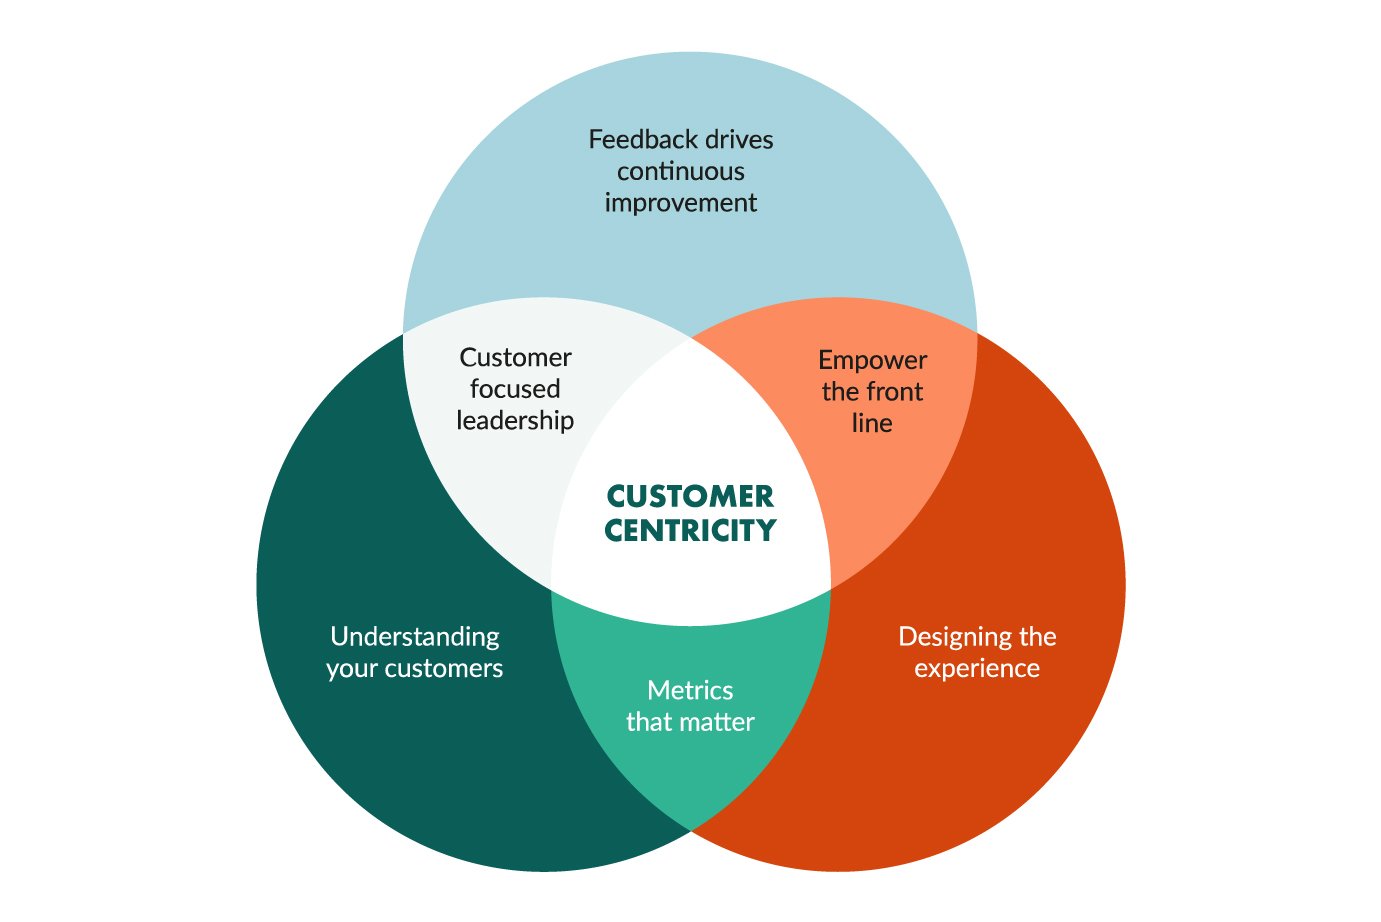 How To Create A Customer Centric Strategy For Your Business